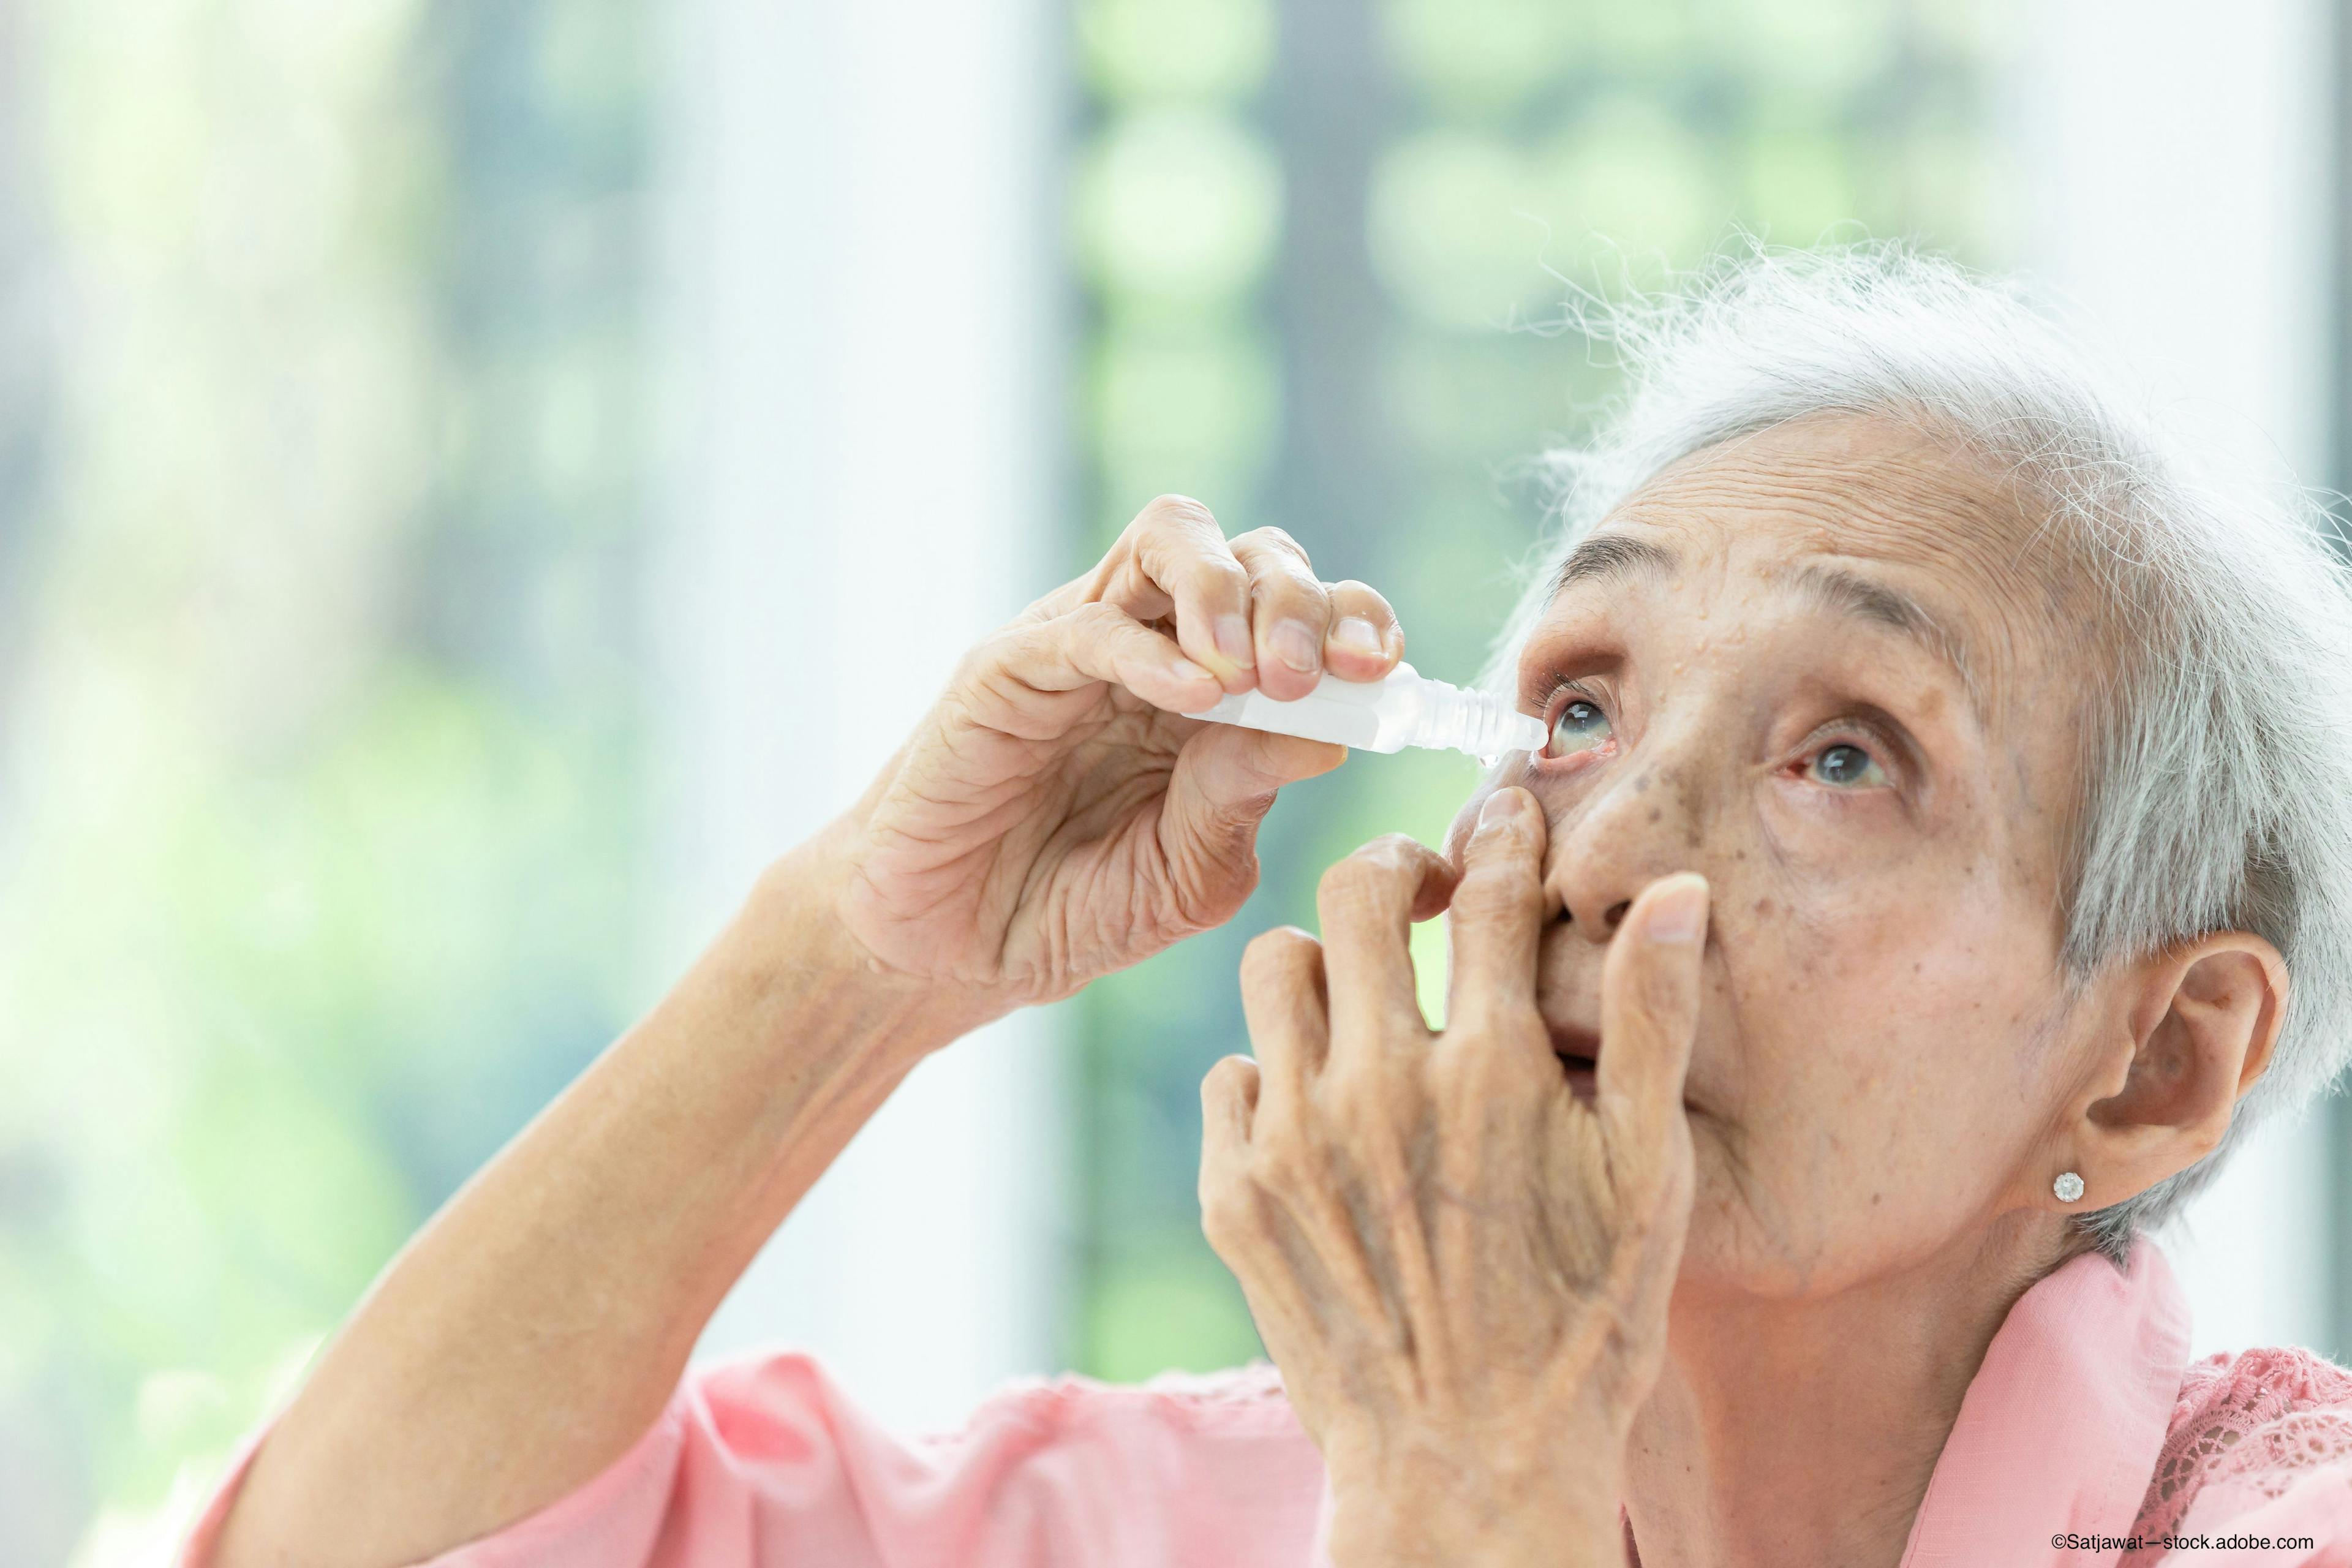 New options are on the horizon for presbyopia-correcting drops